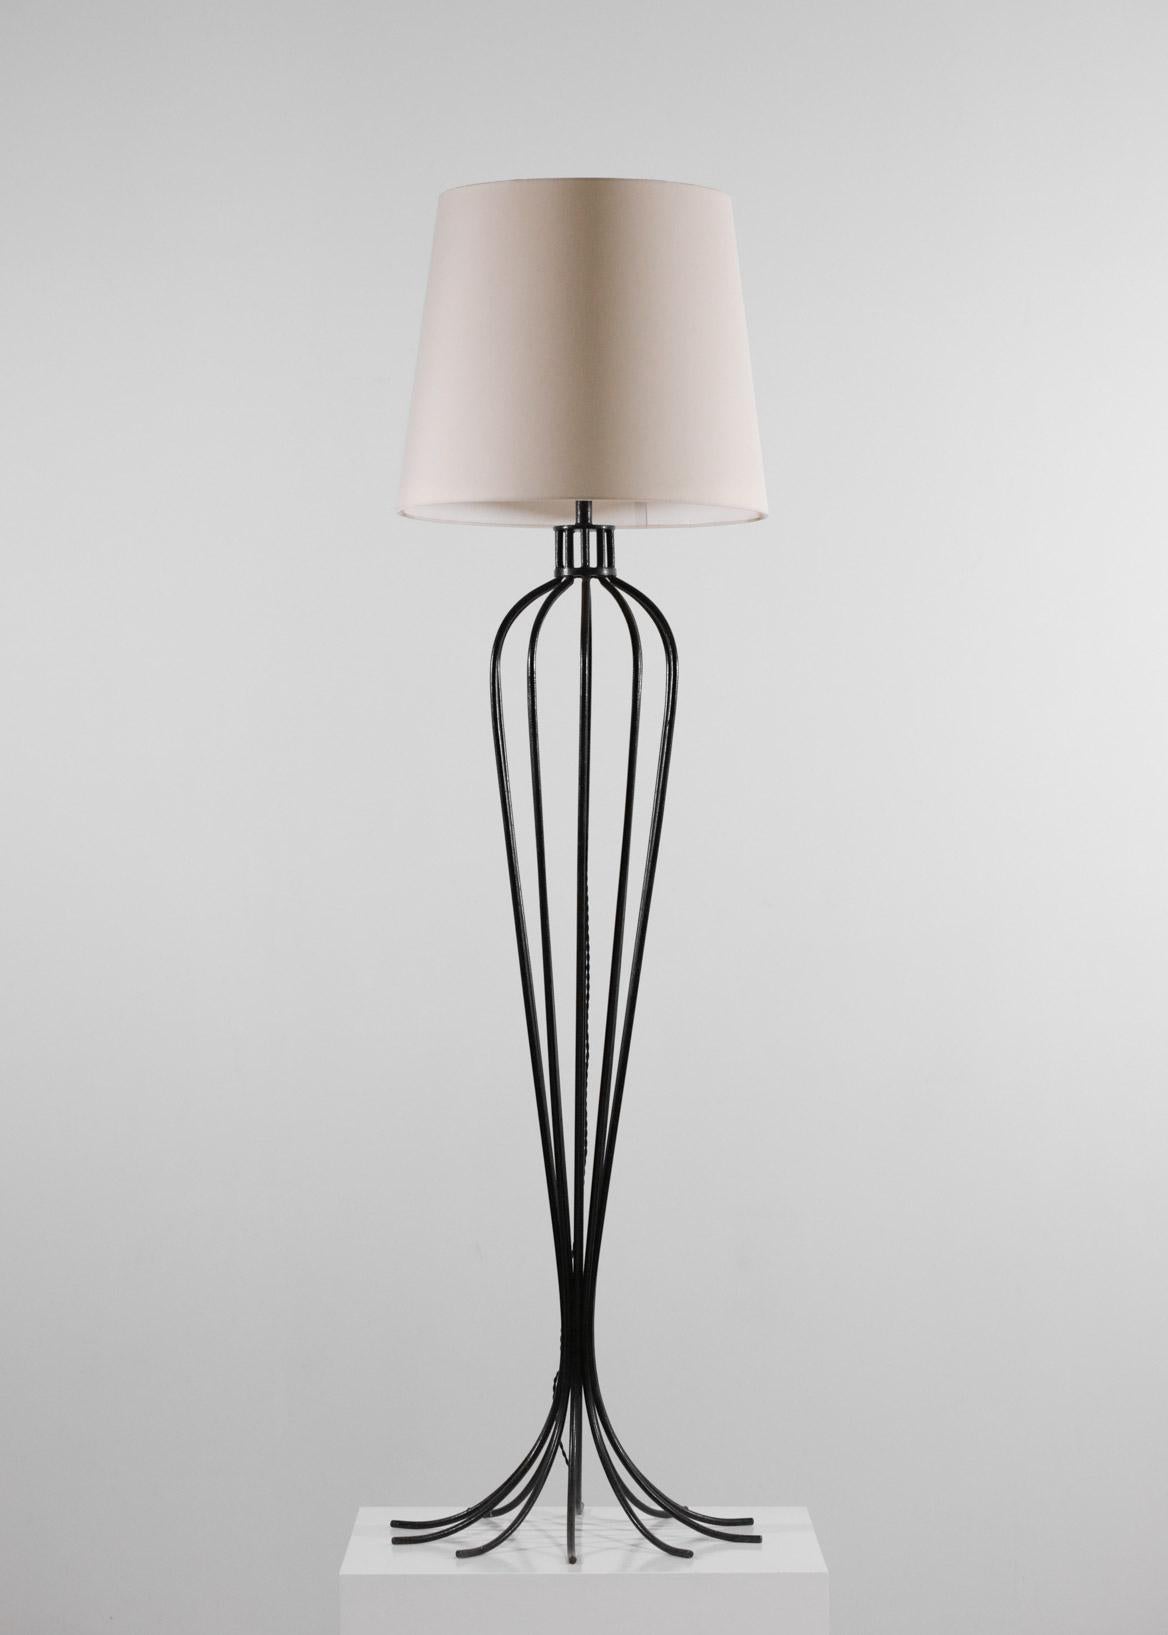 French Floor Lamp in Style of Jean Royère Solid Steel from the 50's, E300 2